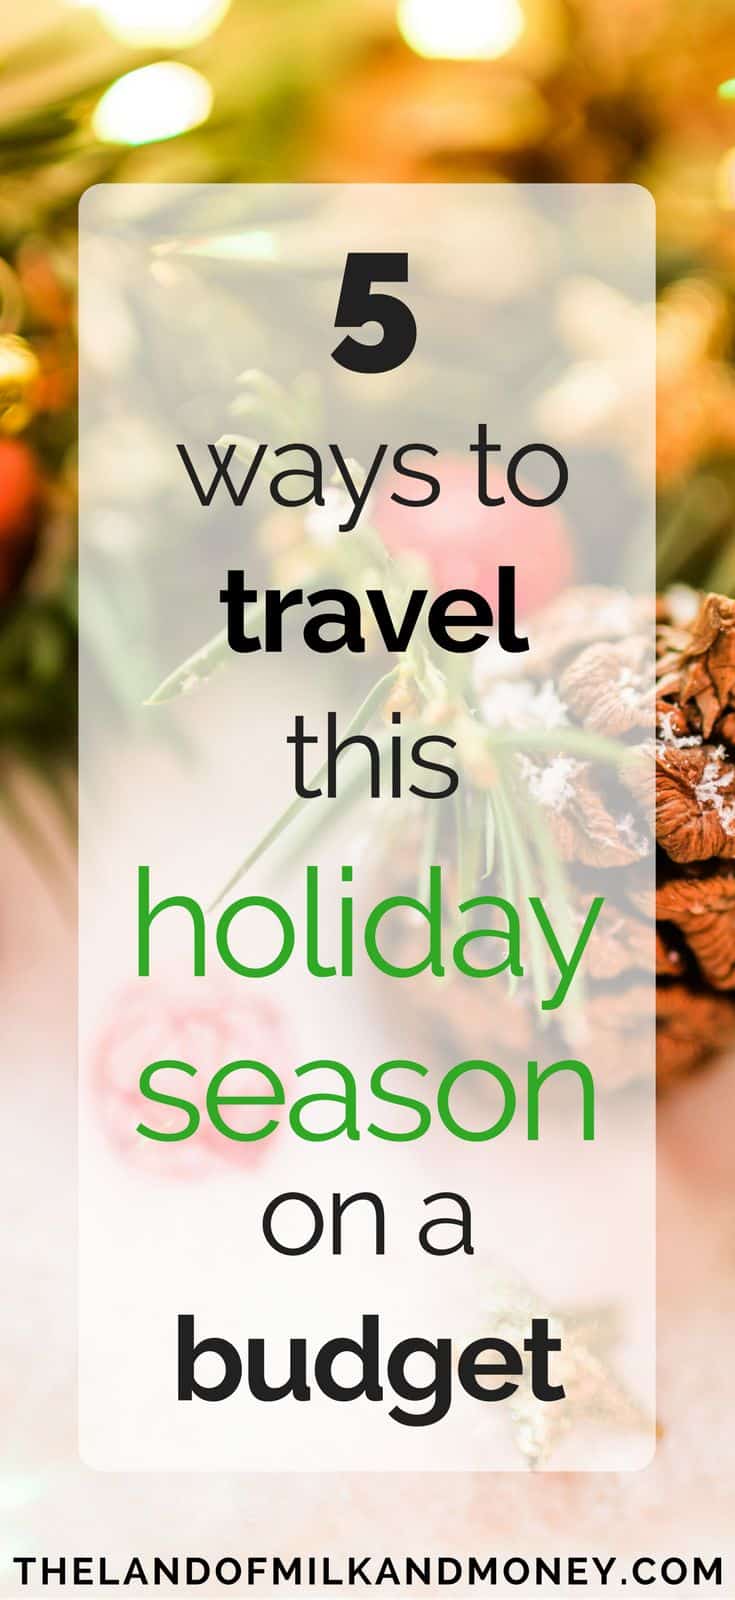 These cheap Christmas travel ideas are great money saving tips for the holidays. Trying to do Christmas on a budget can be super hard but seeing how to do a frugal Christmas with things like this is amazing to help me save money and embrace frugal living, even when trying to get to my dream destinations these holidays! #christmas #holidays #frugal #savemoney